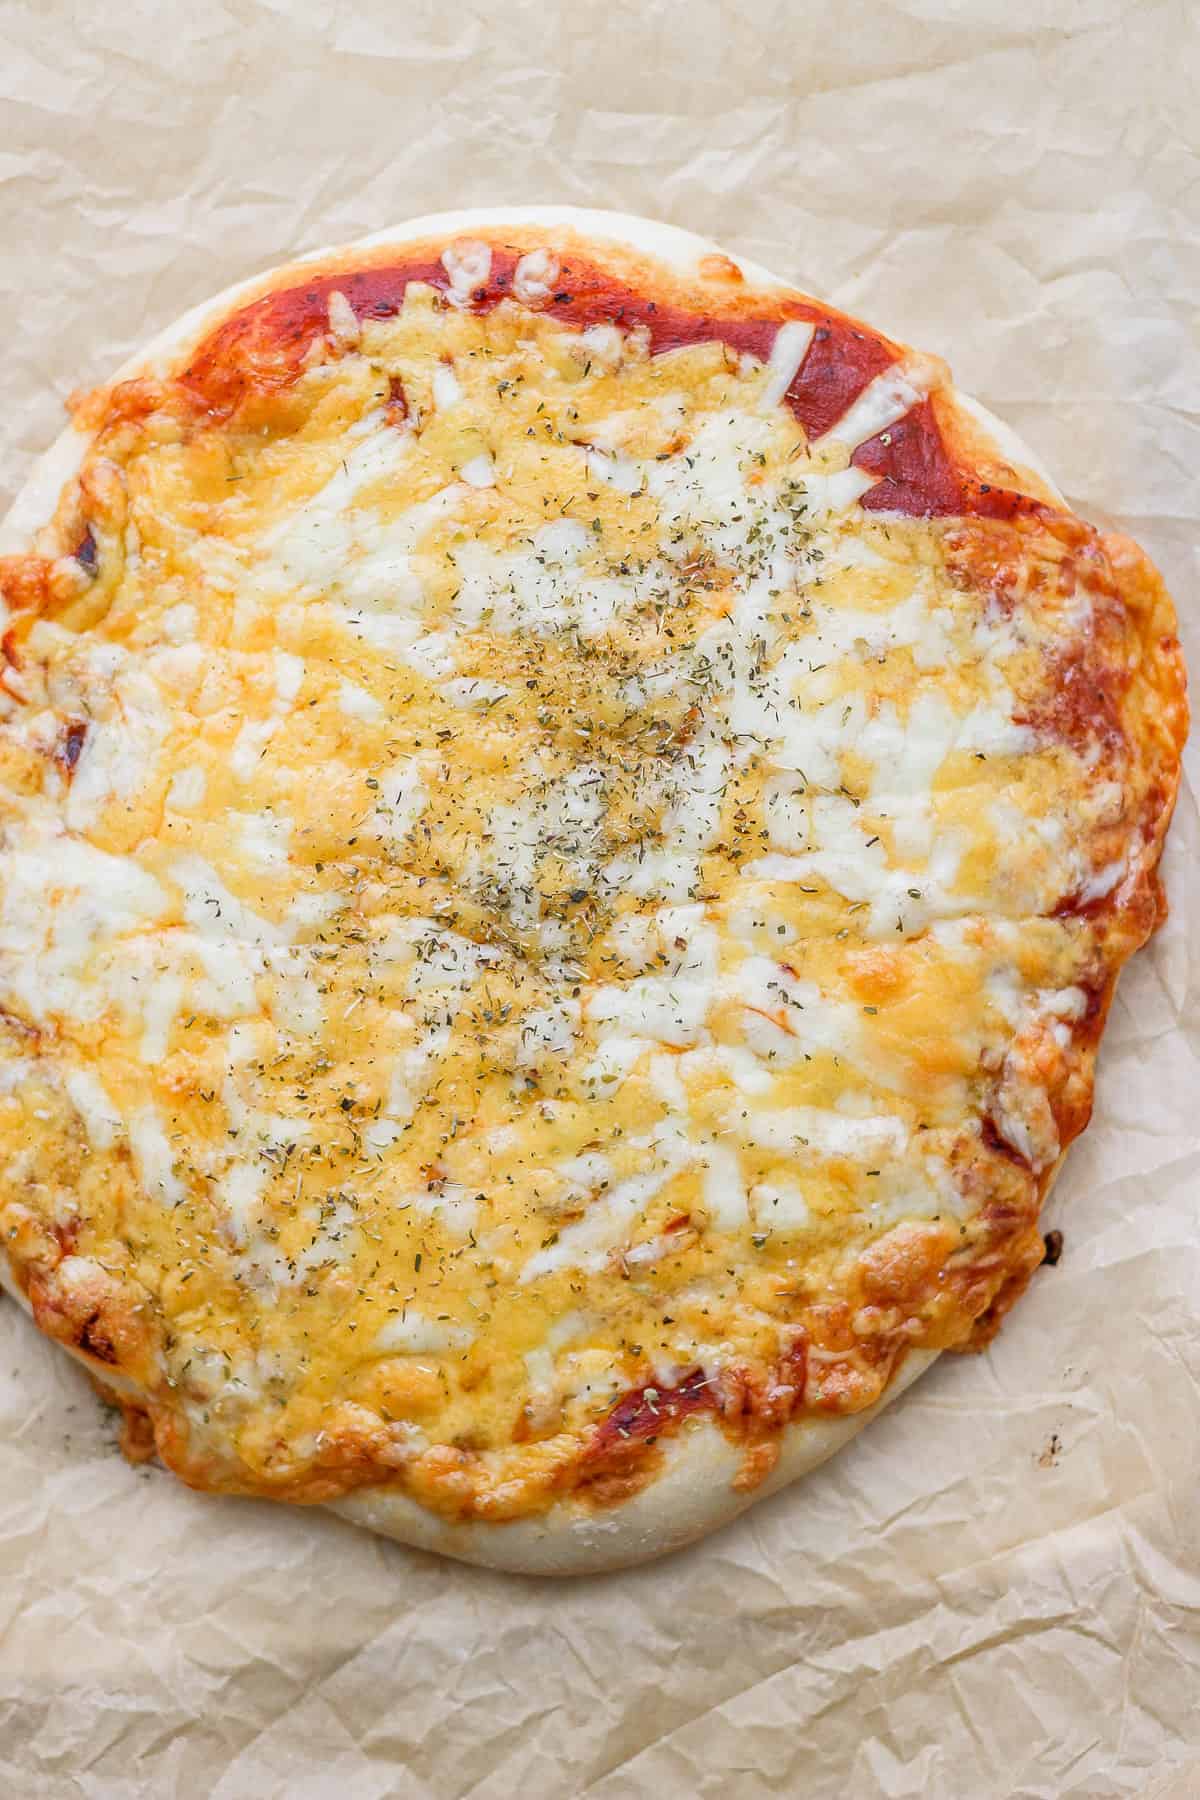 https://feelgoodfoodie.net/wp-content/uploads/2020/12/how-to-make-pizza-dough-12.jpg